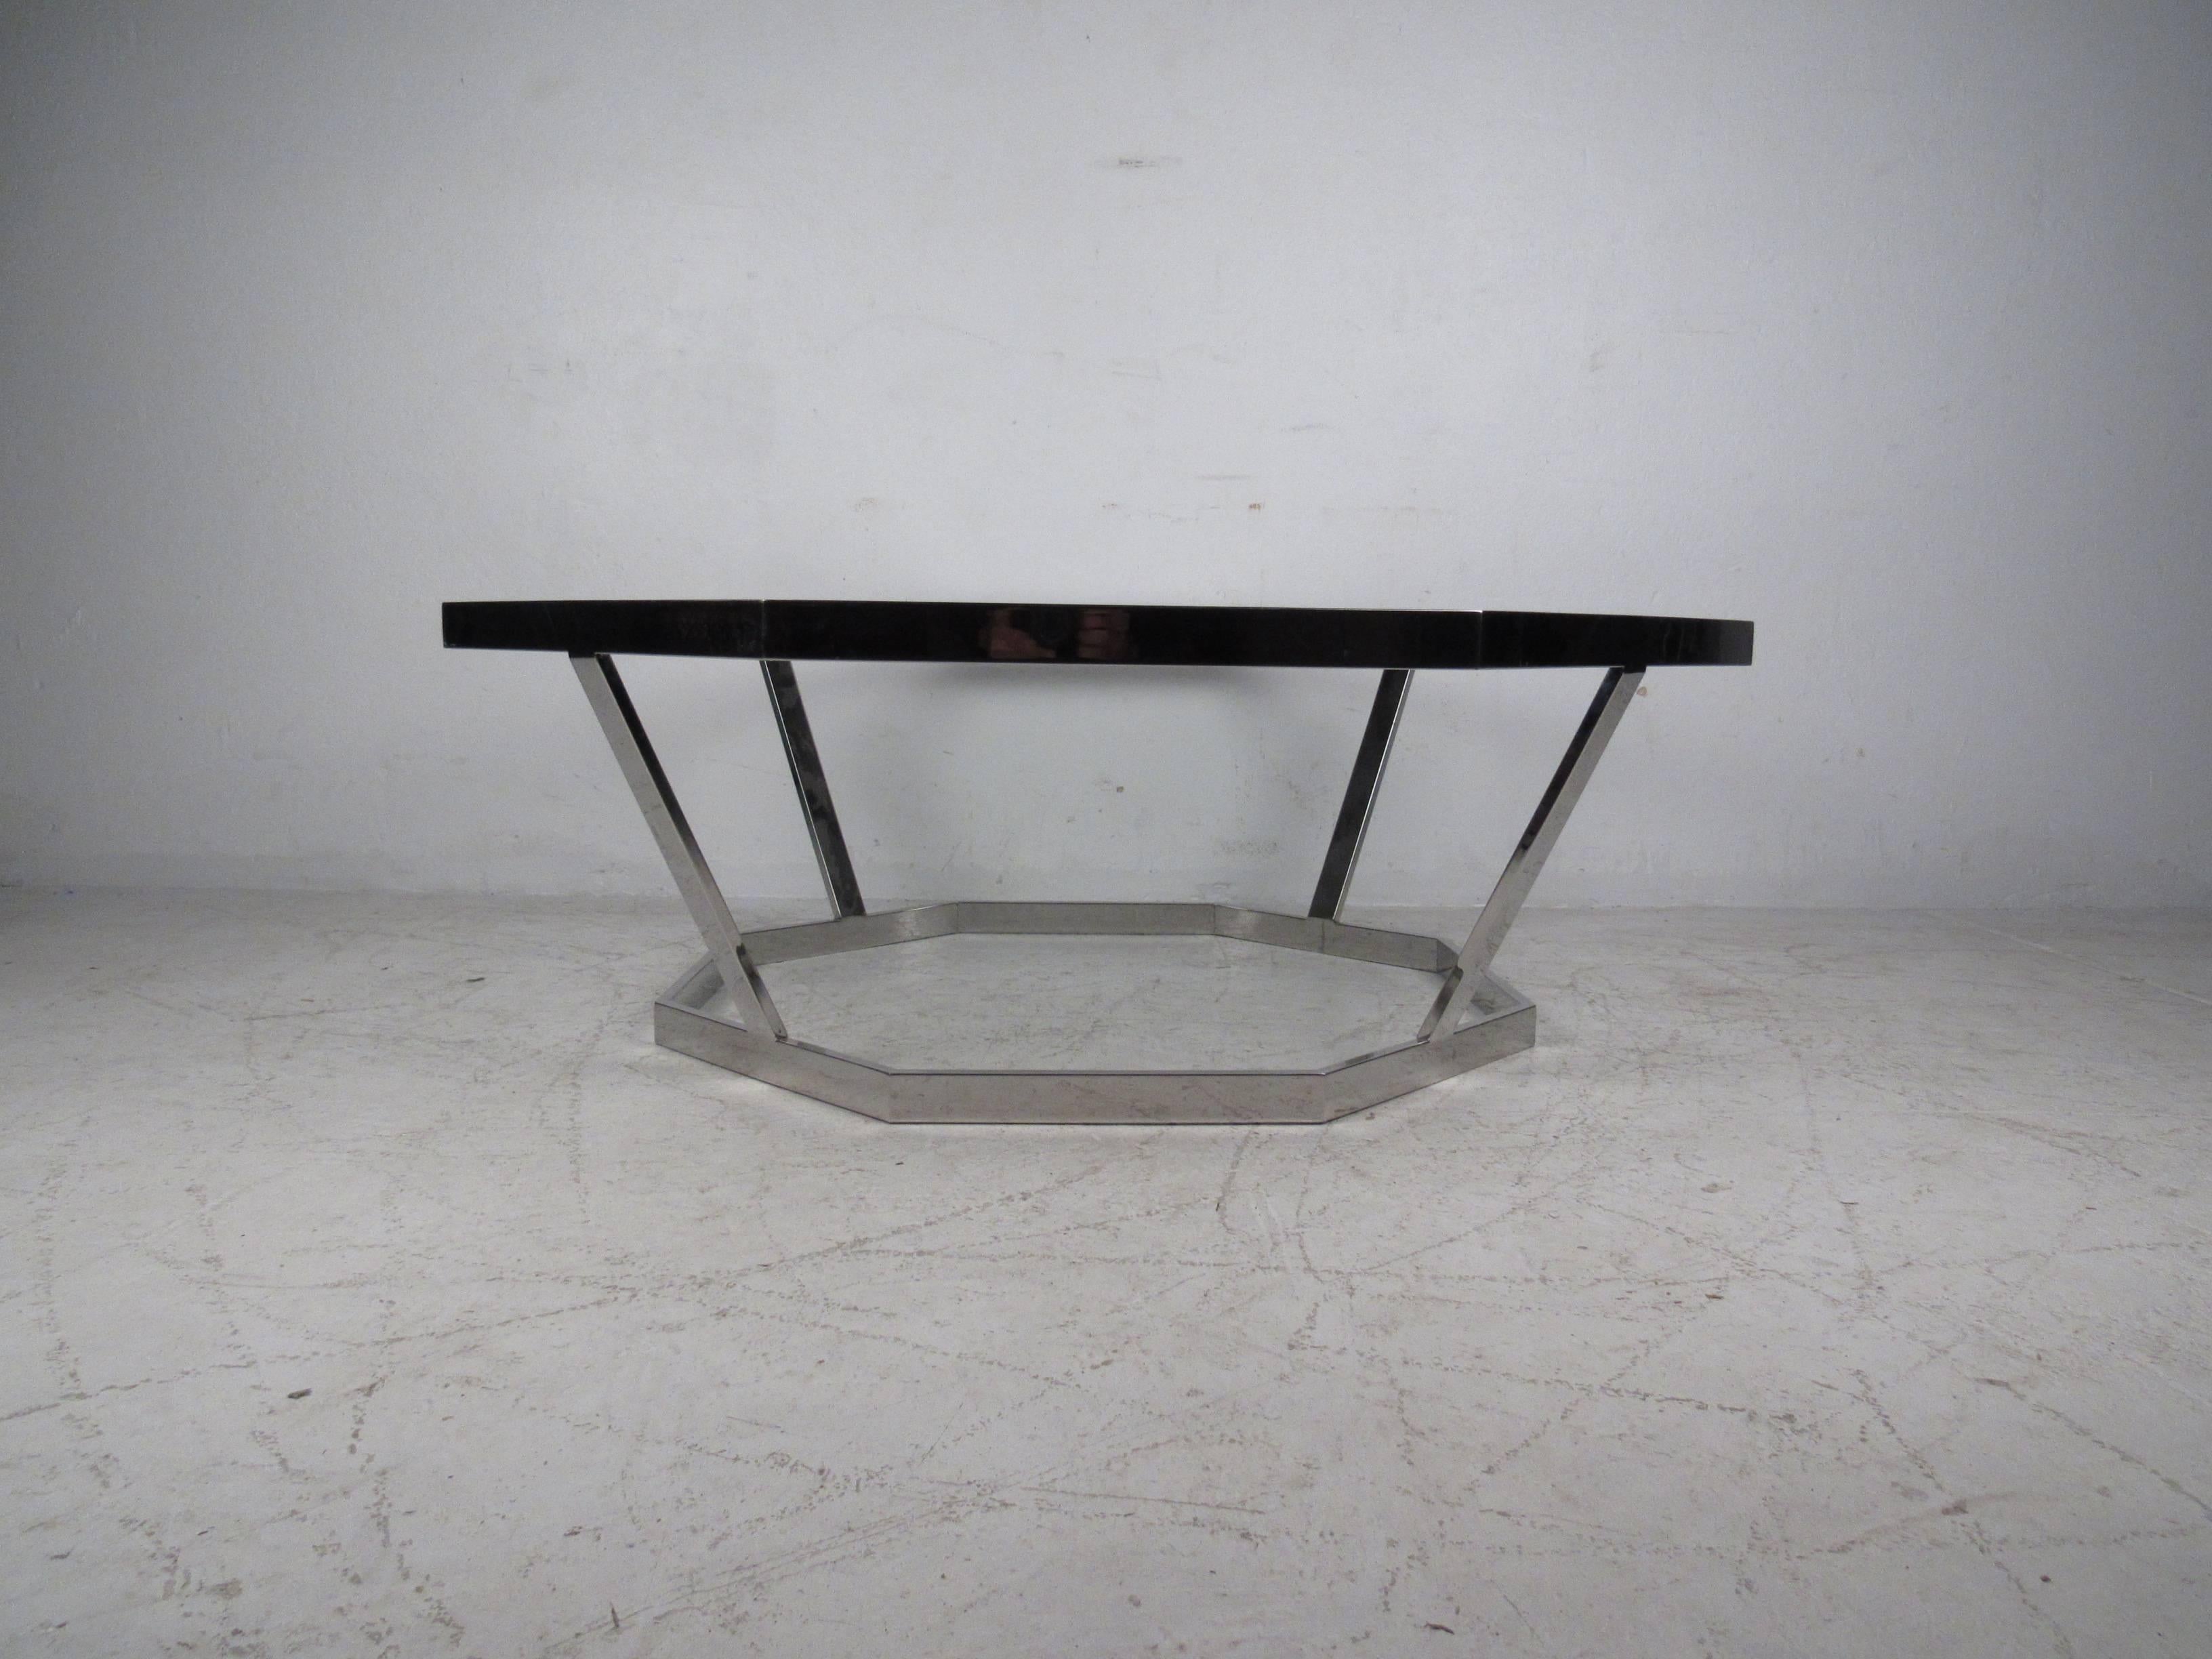 Well crafted octagonal coffee table attributed to Milo Baughman features heavy weight chrome and glass top. Perfect center table for home or business seating area. Please confirm item location (NY or NJ).